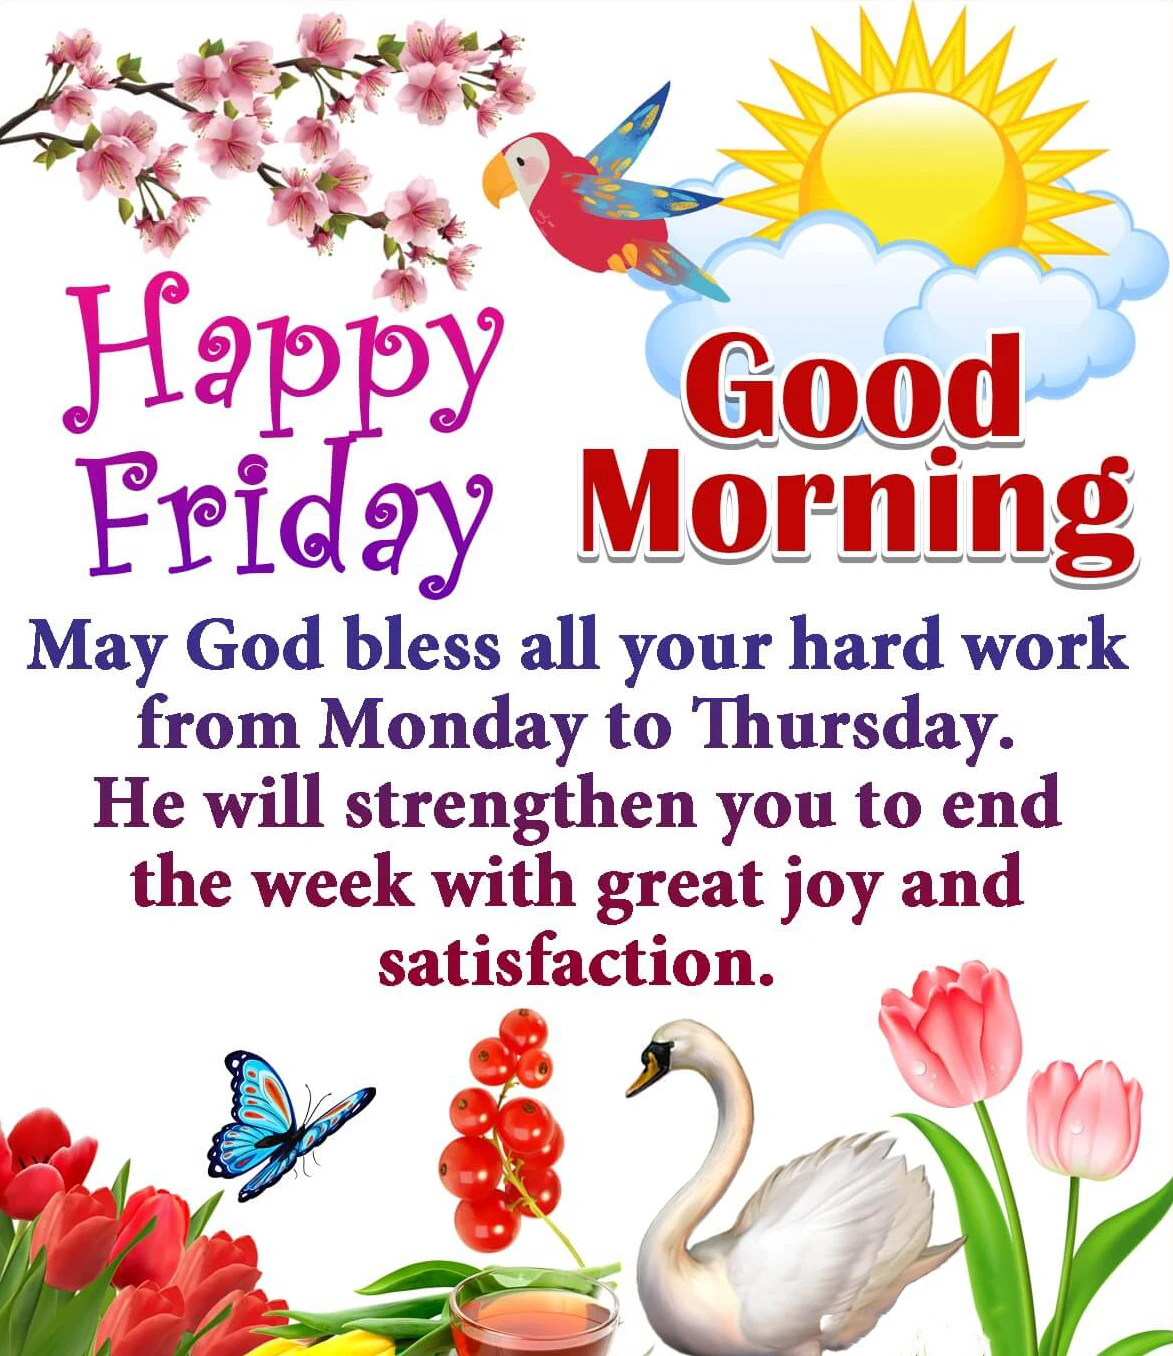 Happy Friday Good Morning Wish _ May God bless and your hard work for Monday to Thursday He will strengthen you to end the week with great joy and satisfaction